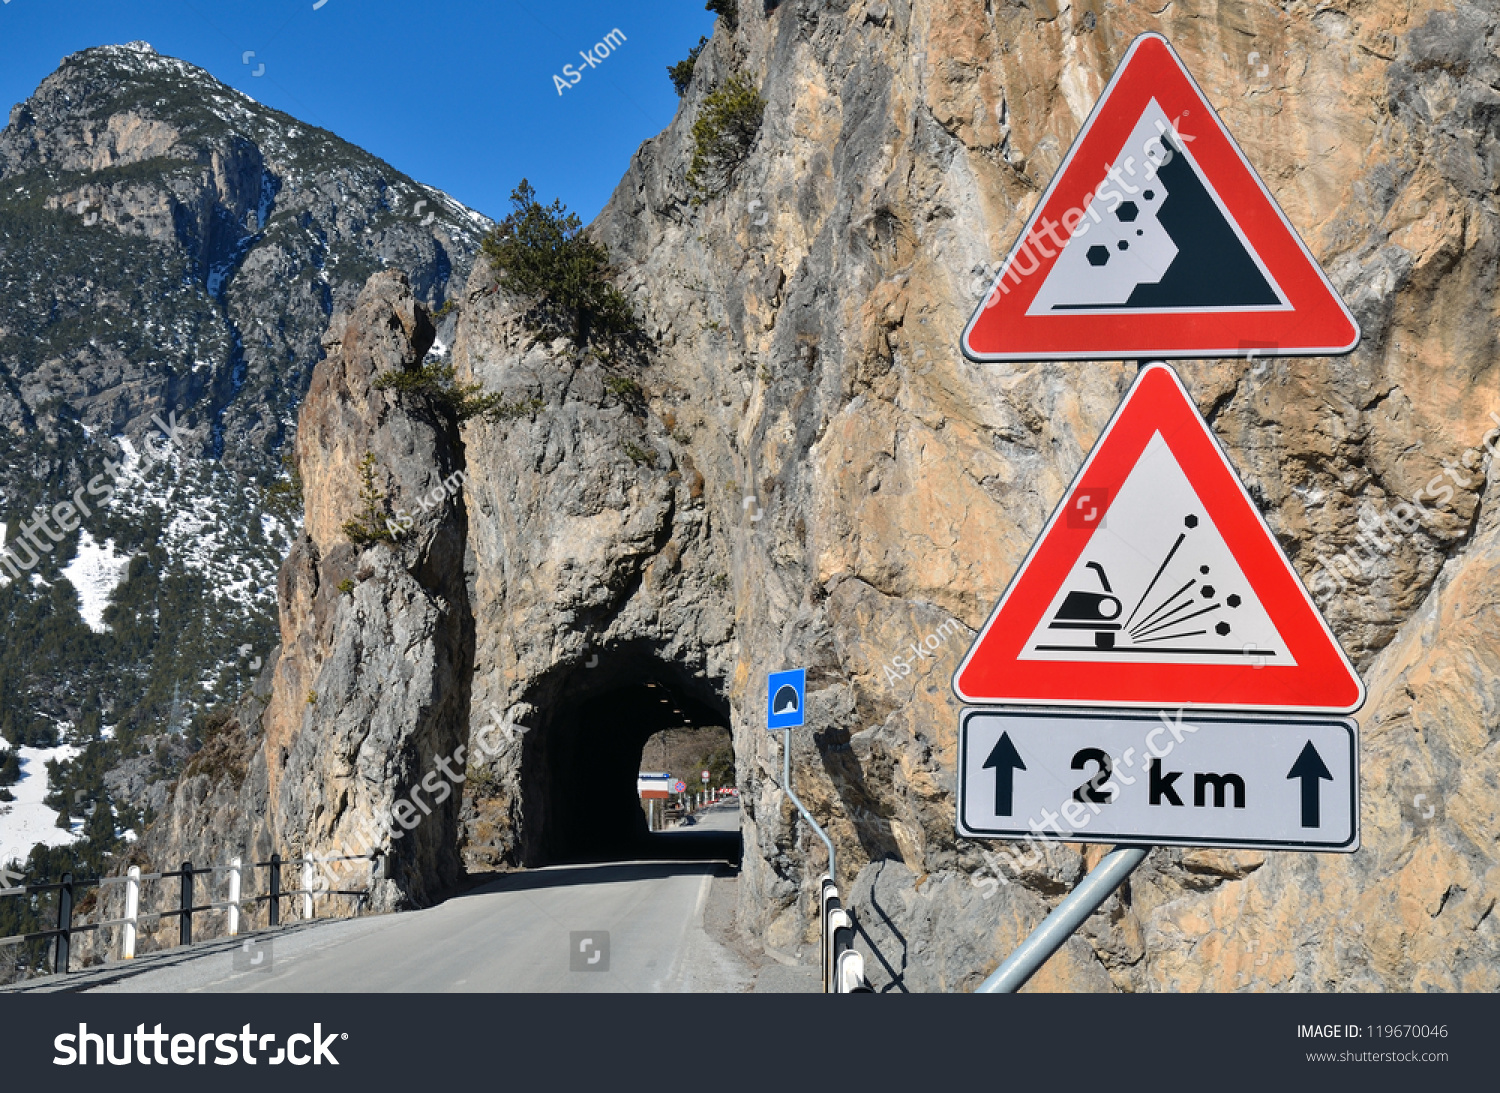 Warning Traffic Signs On Mountain Road Stock Photo Edit Now